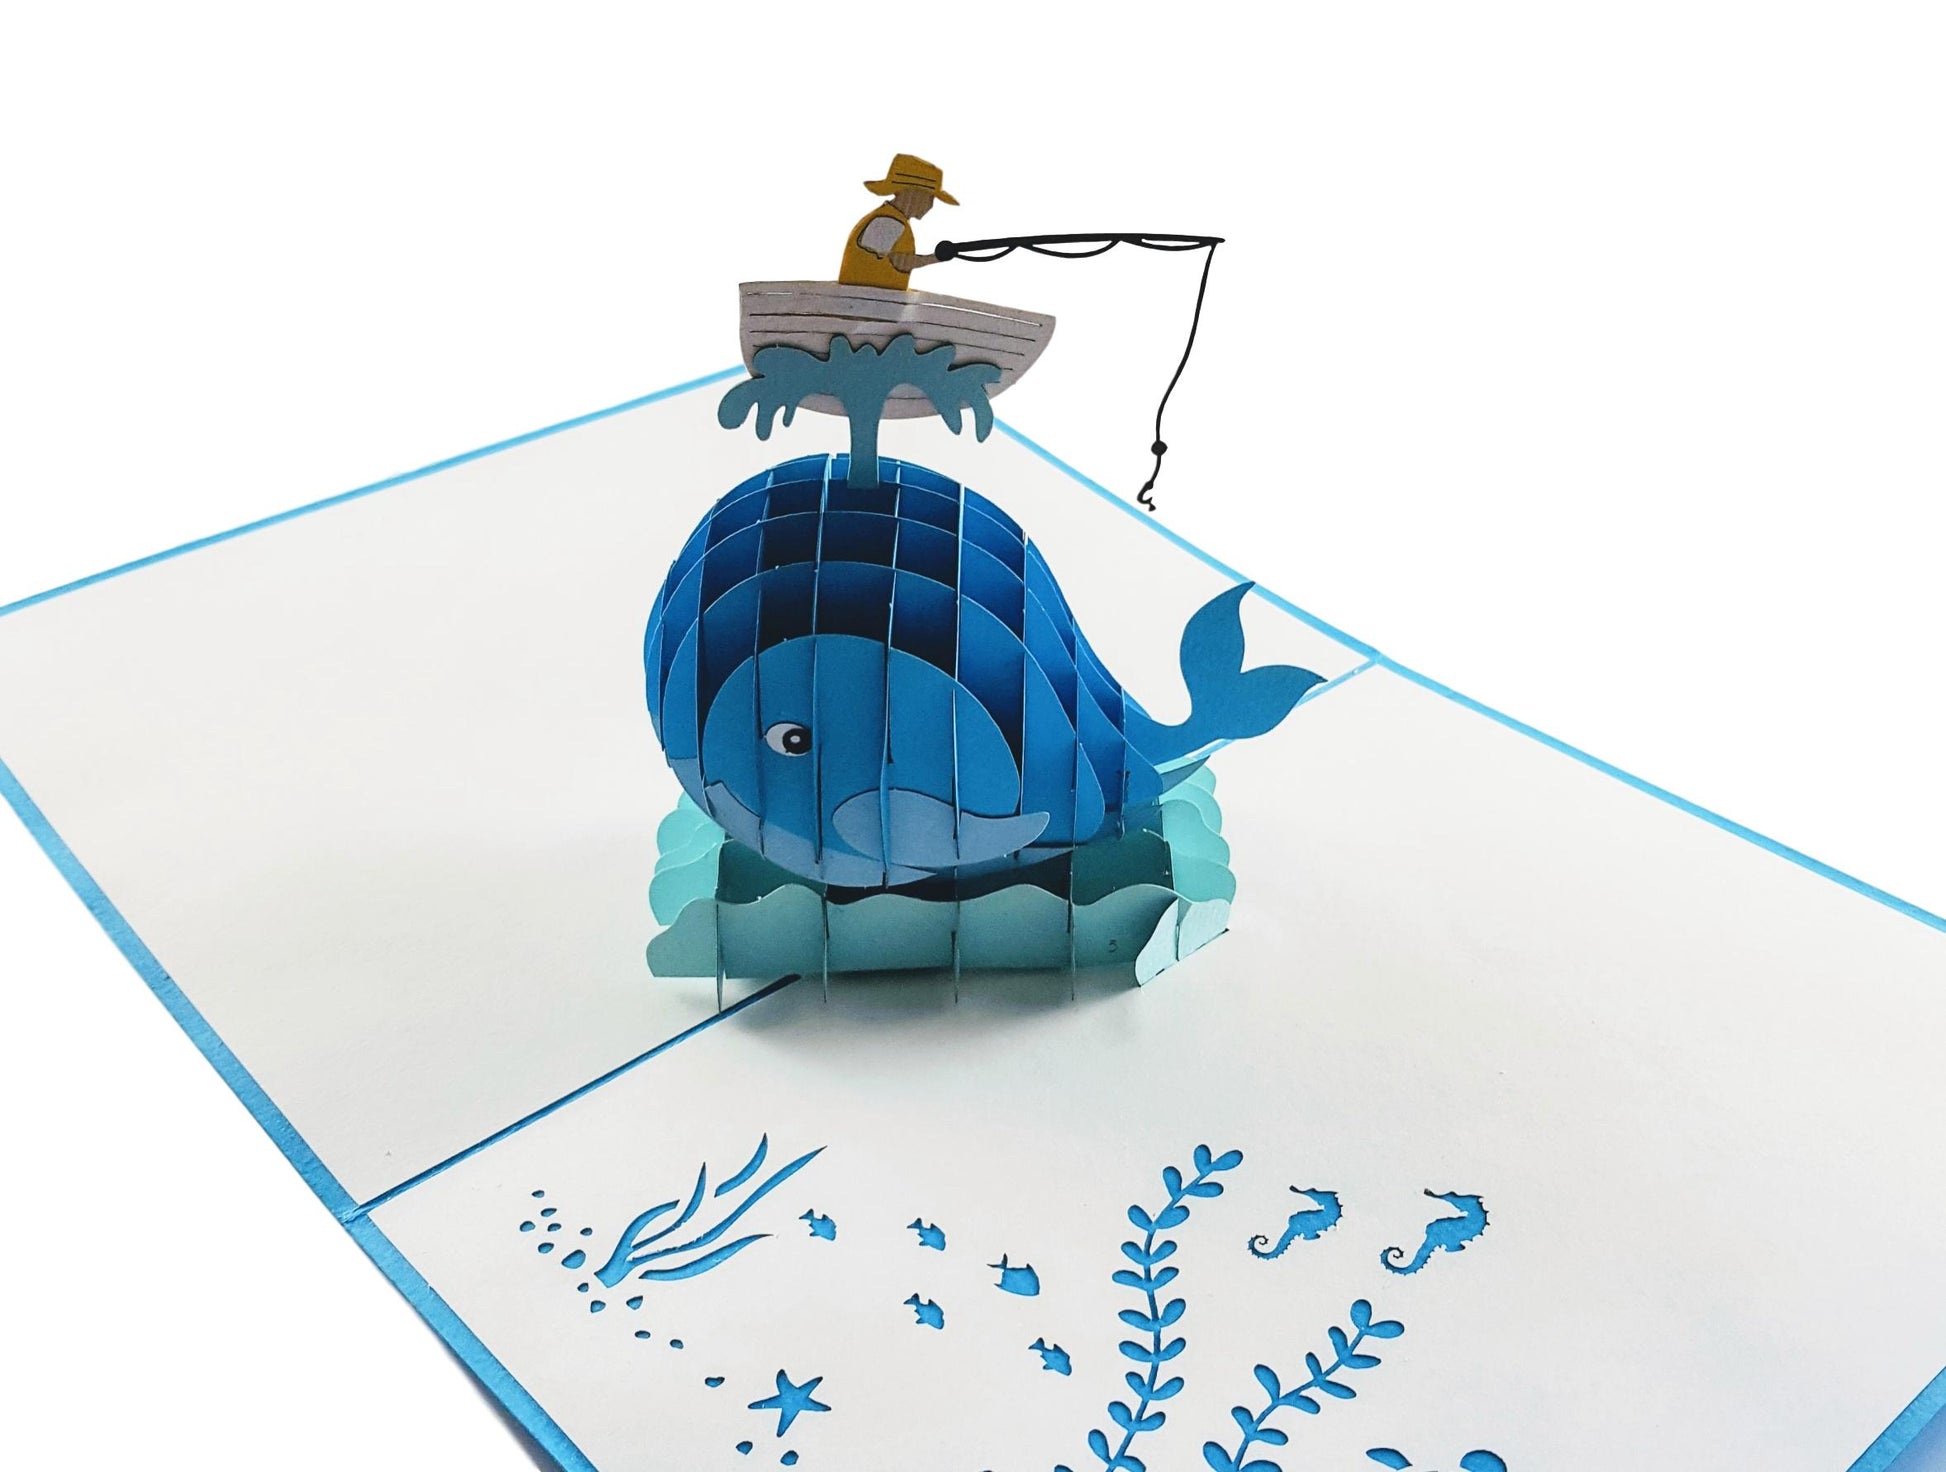 The Man And The Whale 3D Pop Up Greeting Card - Father's Day - Just Because - Retirement - iGifts And Cards